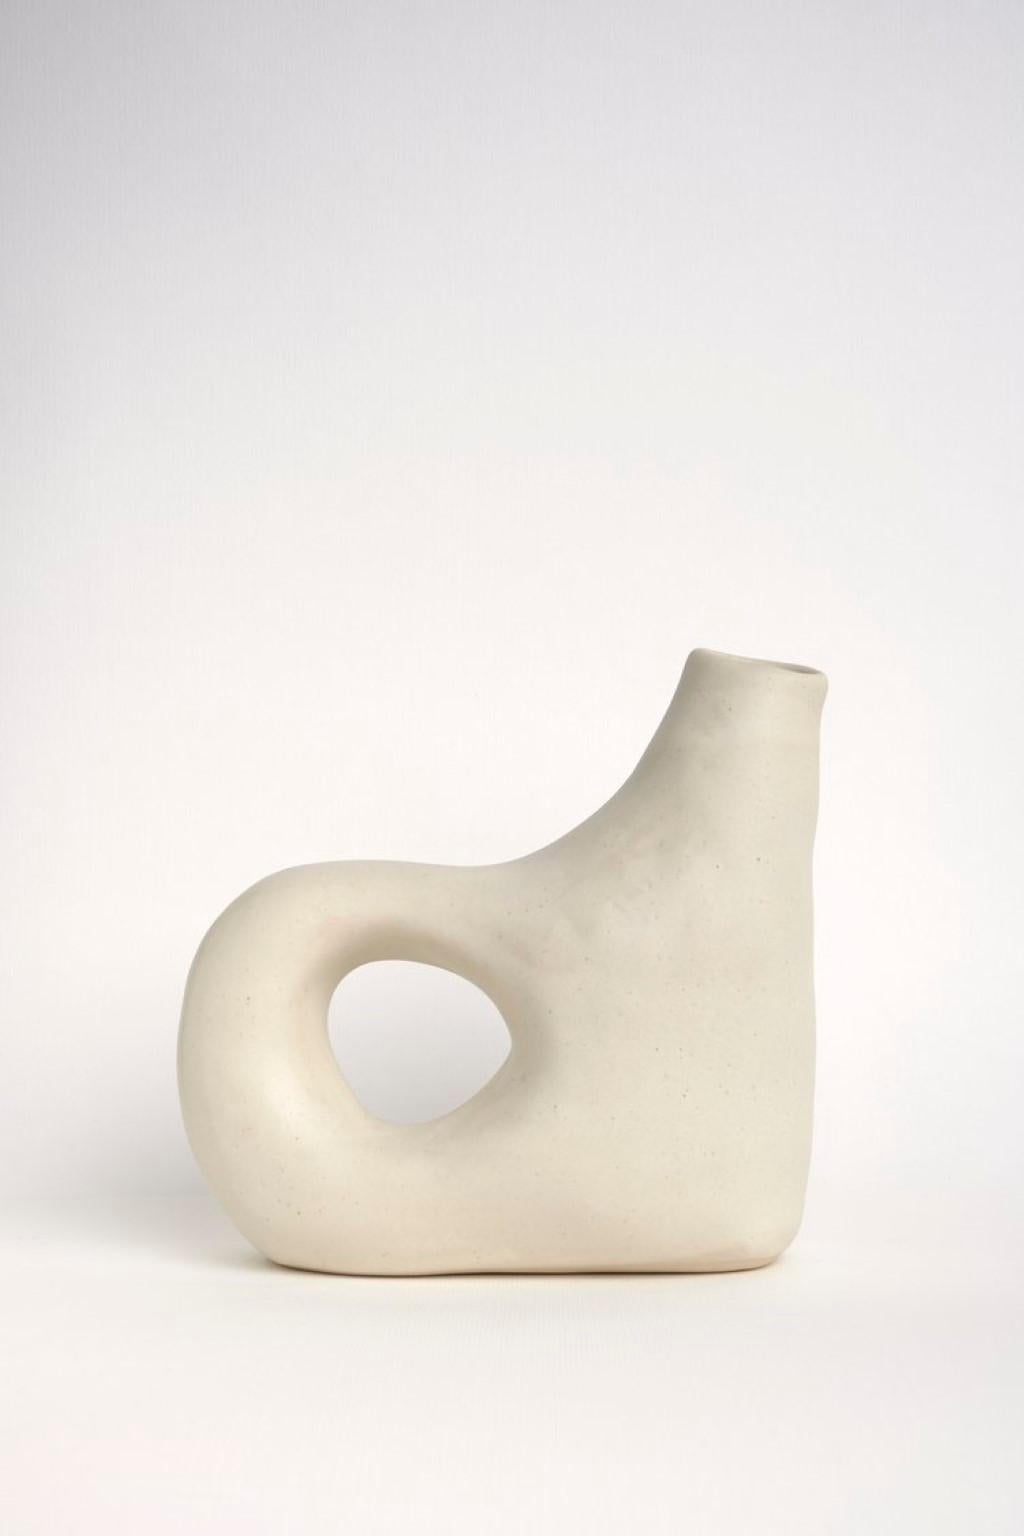 Garrafa No. I vase by Camila Apaez
One of a kind
Materials: stoneware
Dimensions: 17 x 8 x 18 cm
Options: White Bone, Chocolate, Buttermilk, Charcoal Black, Glossy, Spotted Gray, Pale Opal, Nube, Glossy.

This year has been shaped by the